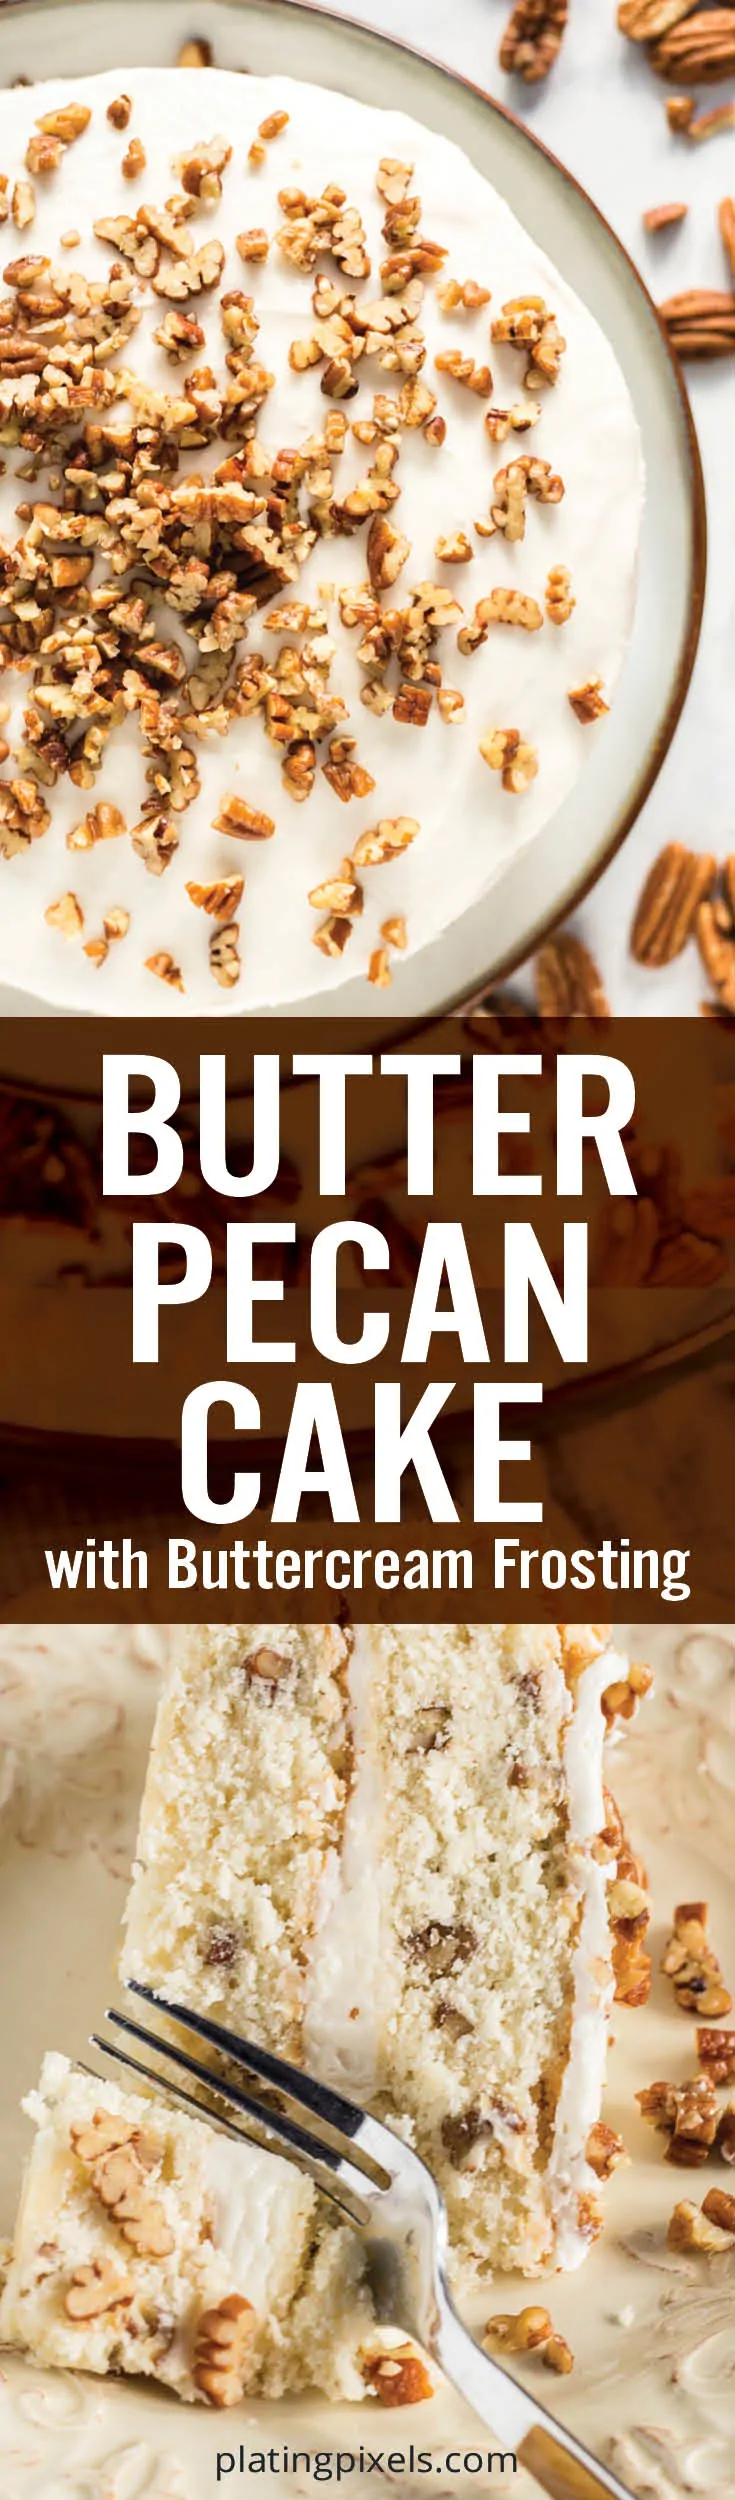 Butter Pecan Cake with Buttercream Frosting